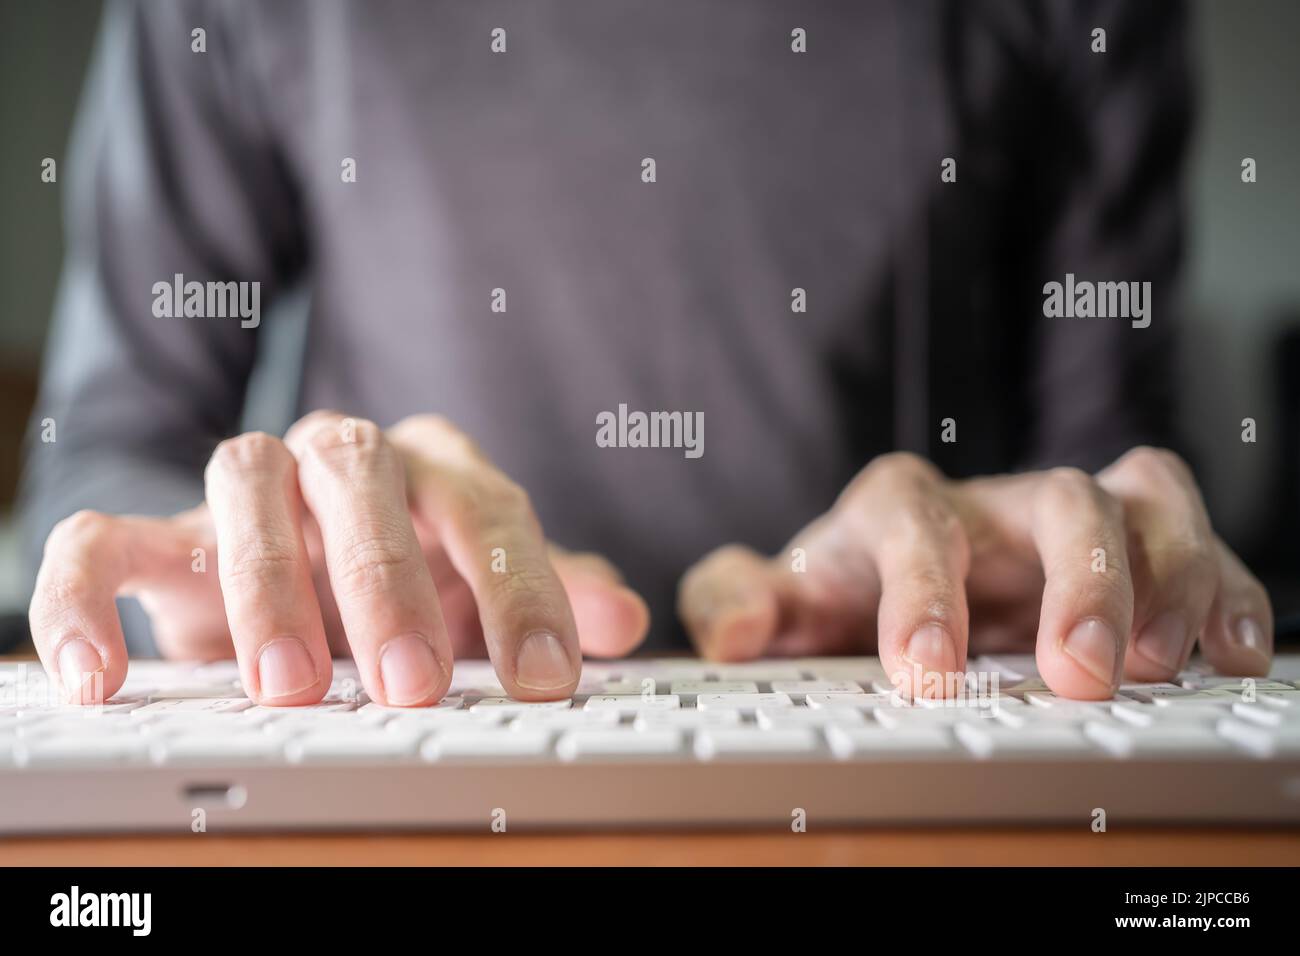 A man typing on a low profile computer keyboard Stock Photo